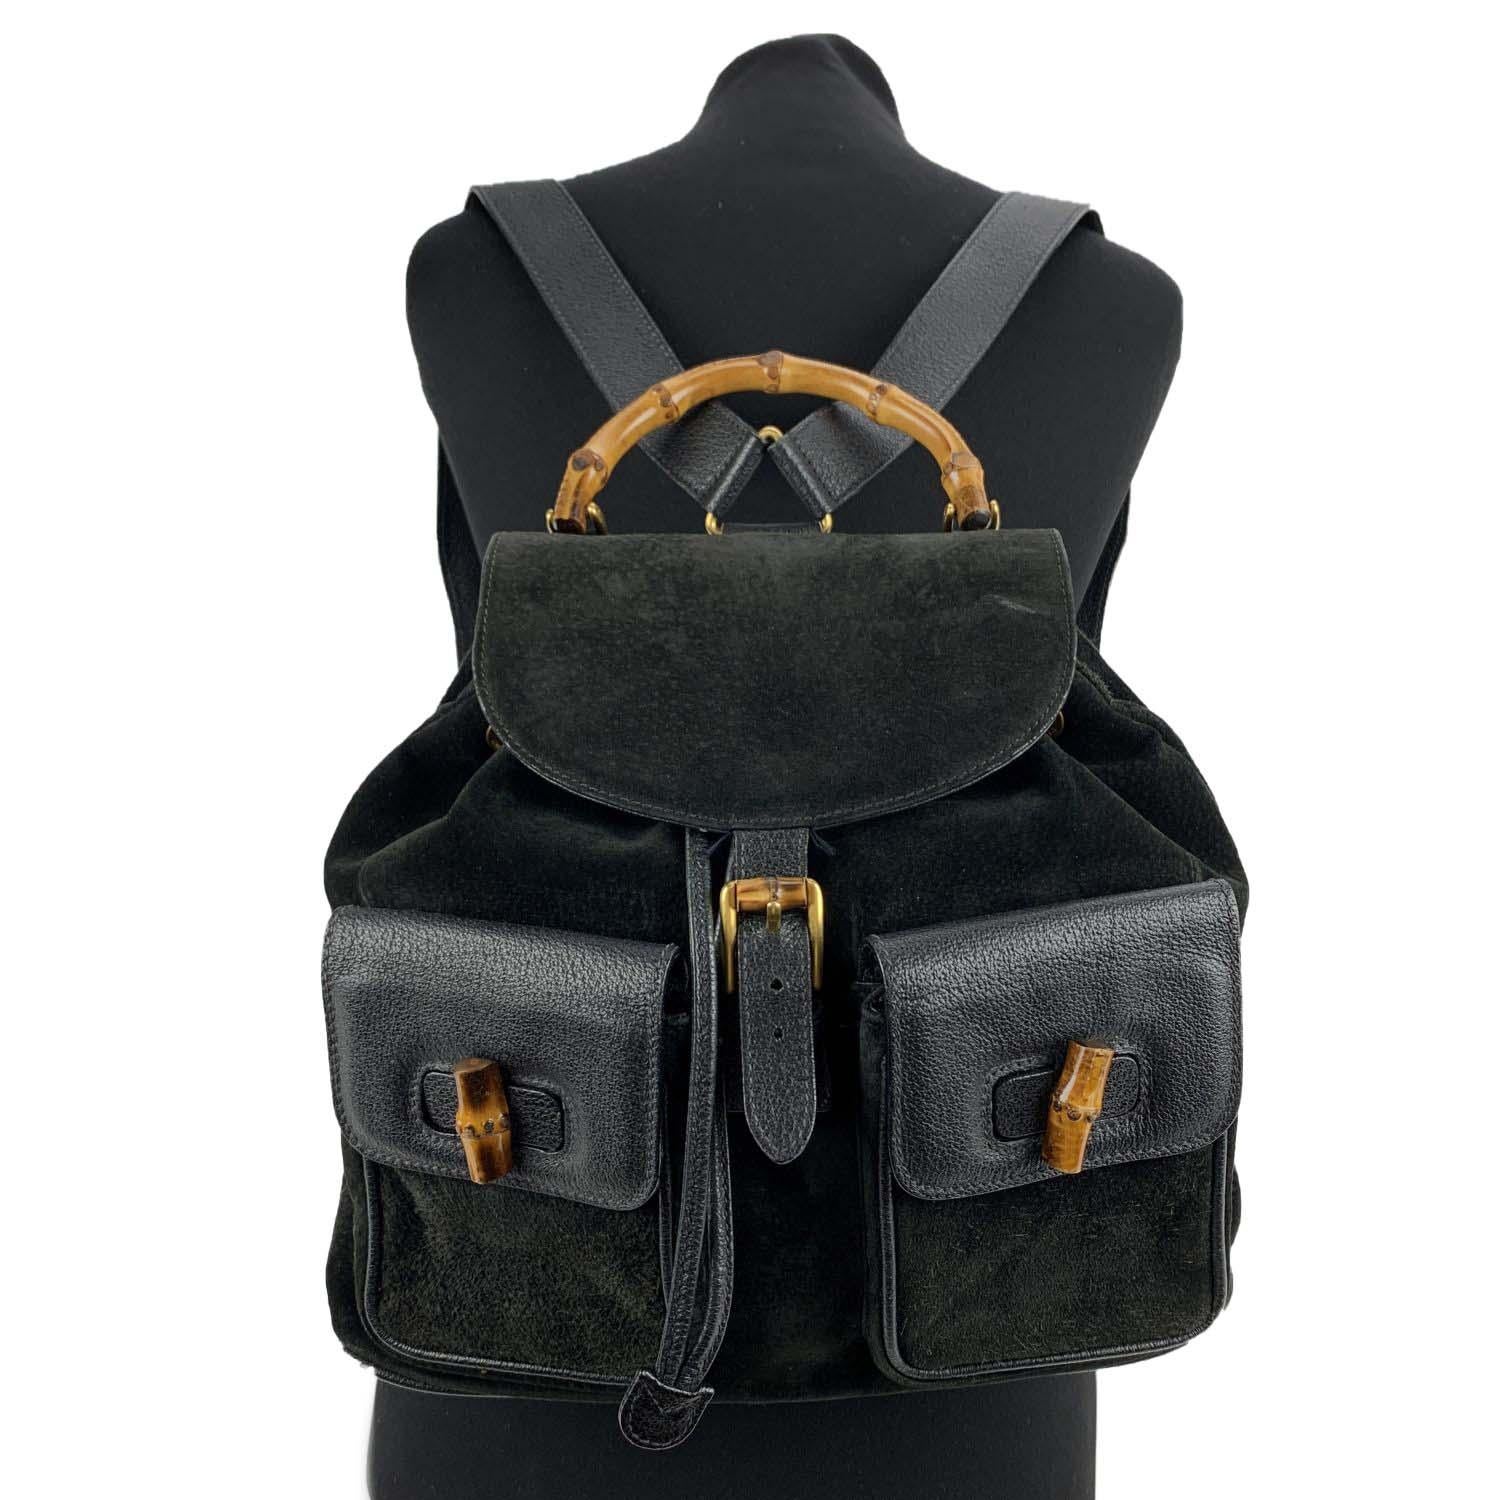 Vintage backpack by Gucci, crafted in black suede and leather. It features Bamboo handle and and knobs. Flap with buckle closure and drawstring top opening. Internal black diamond lining. 1 side zipper pocket inside (GUCCI - GG gold metal zipper